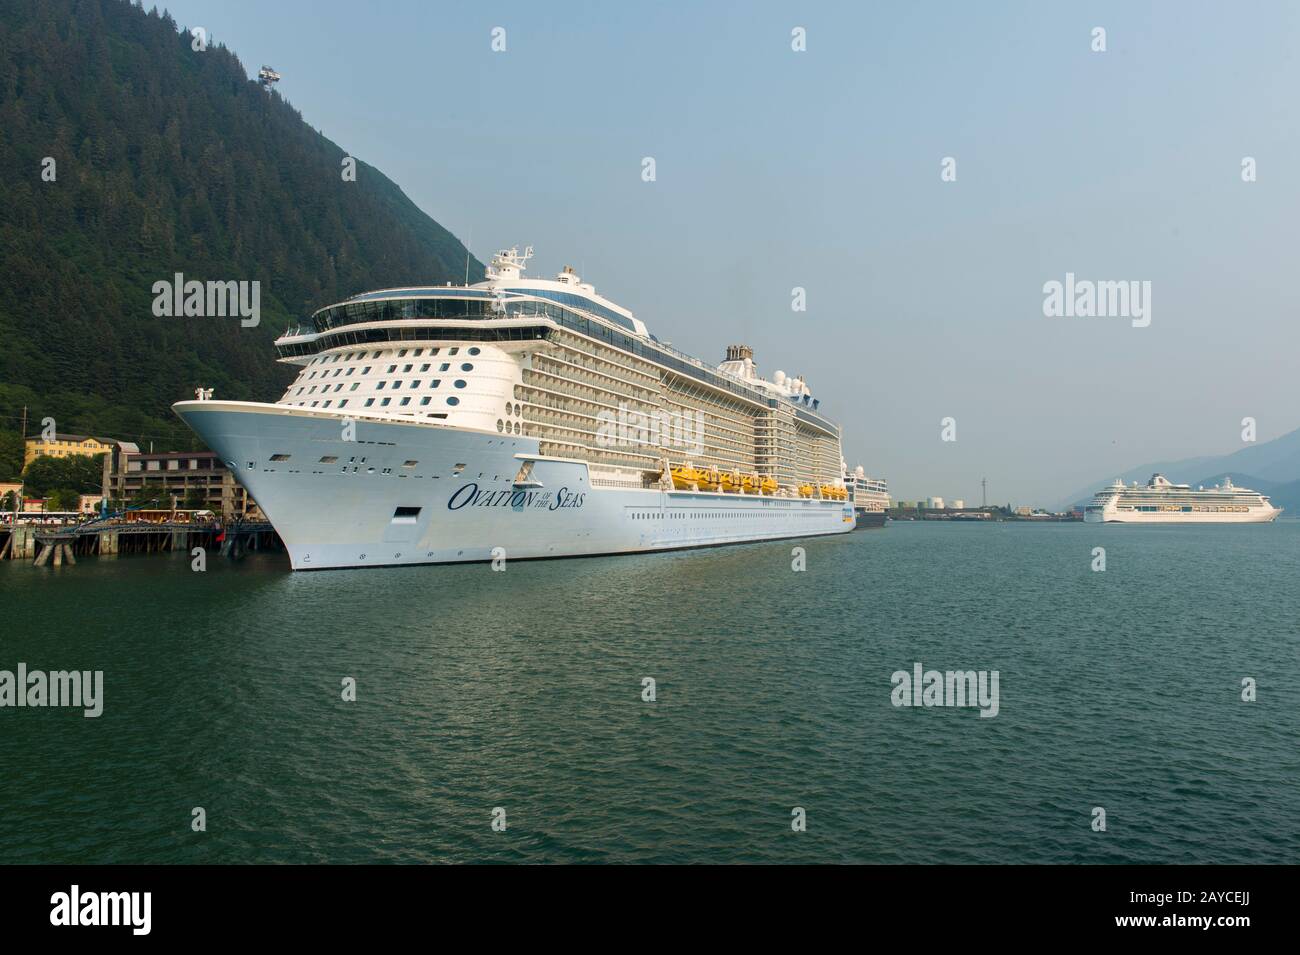 The Ovation of the Seas is a Quantum-class cruise ship owned by Royal Caribbean International, here docked in Juneau, Southeast Alaska, USA. Stock Photo